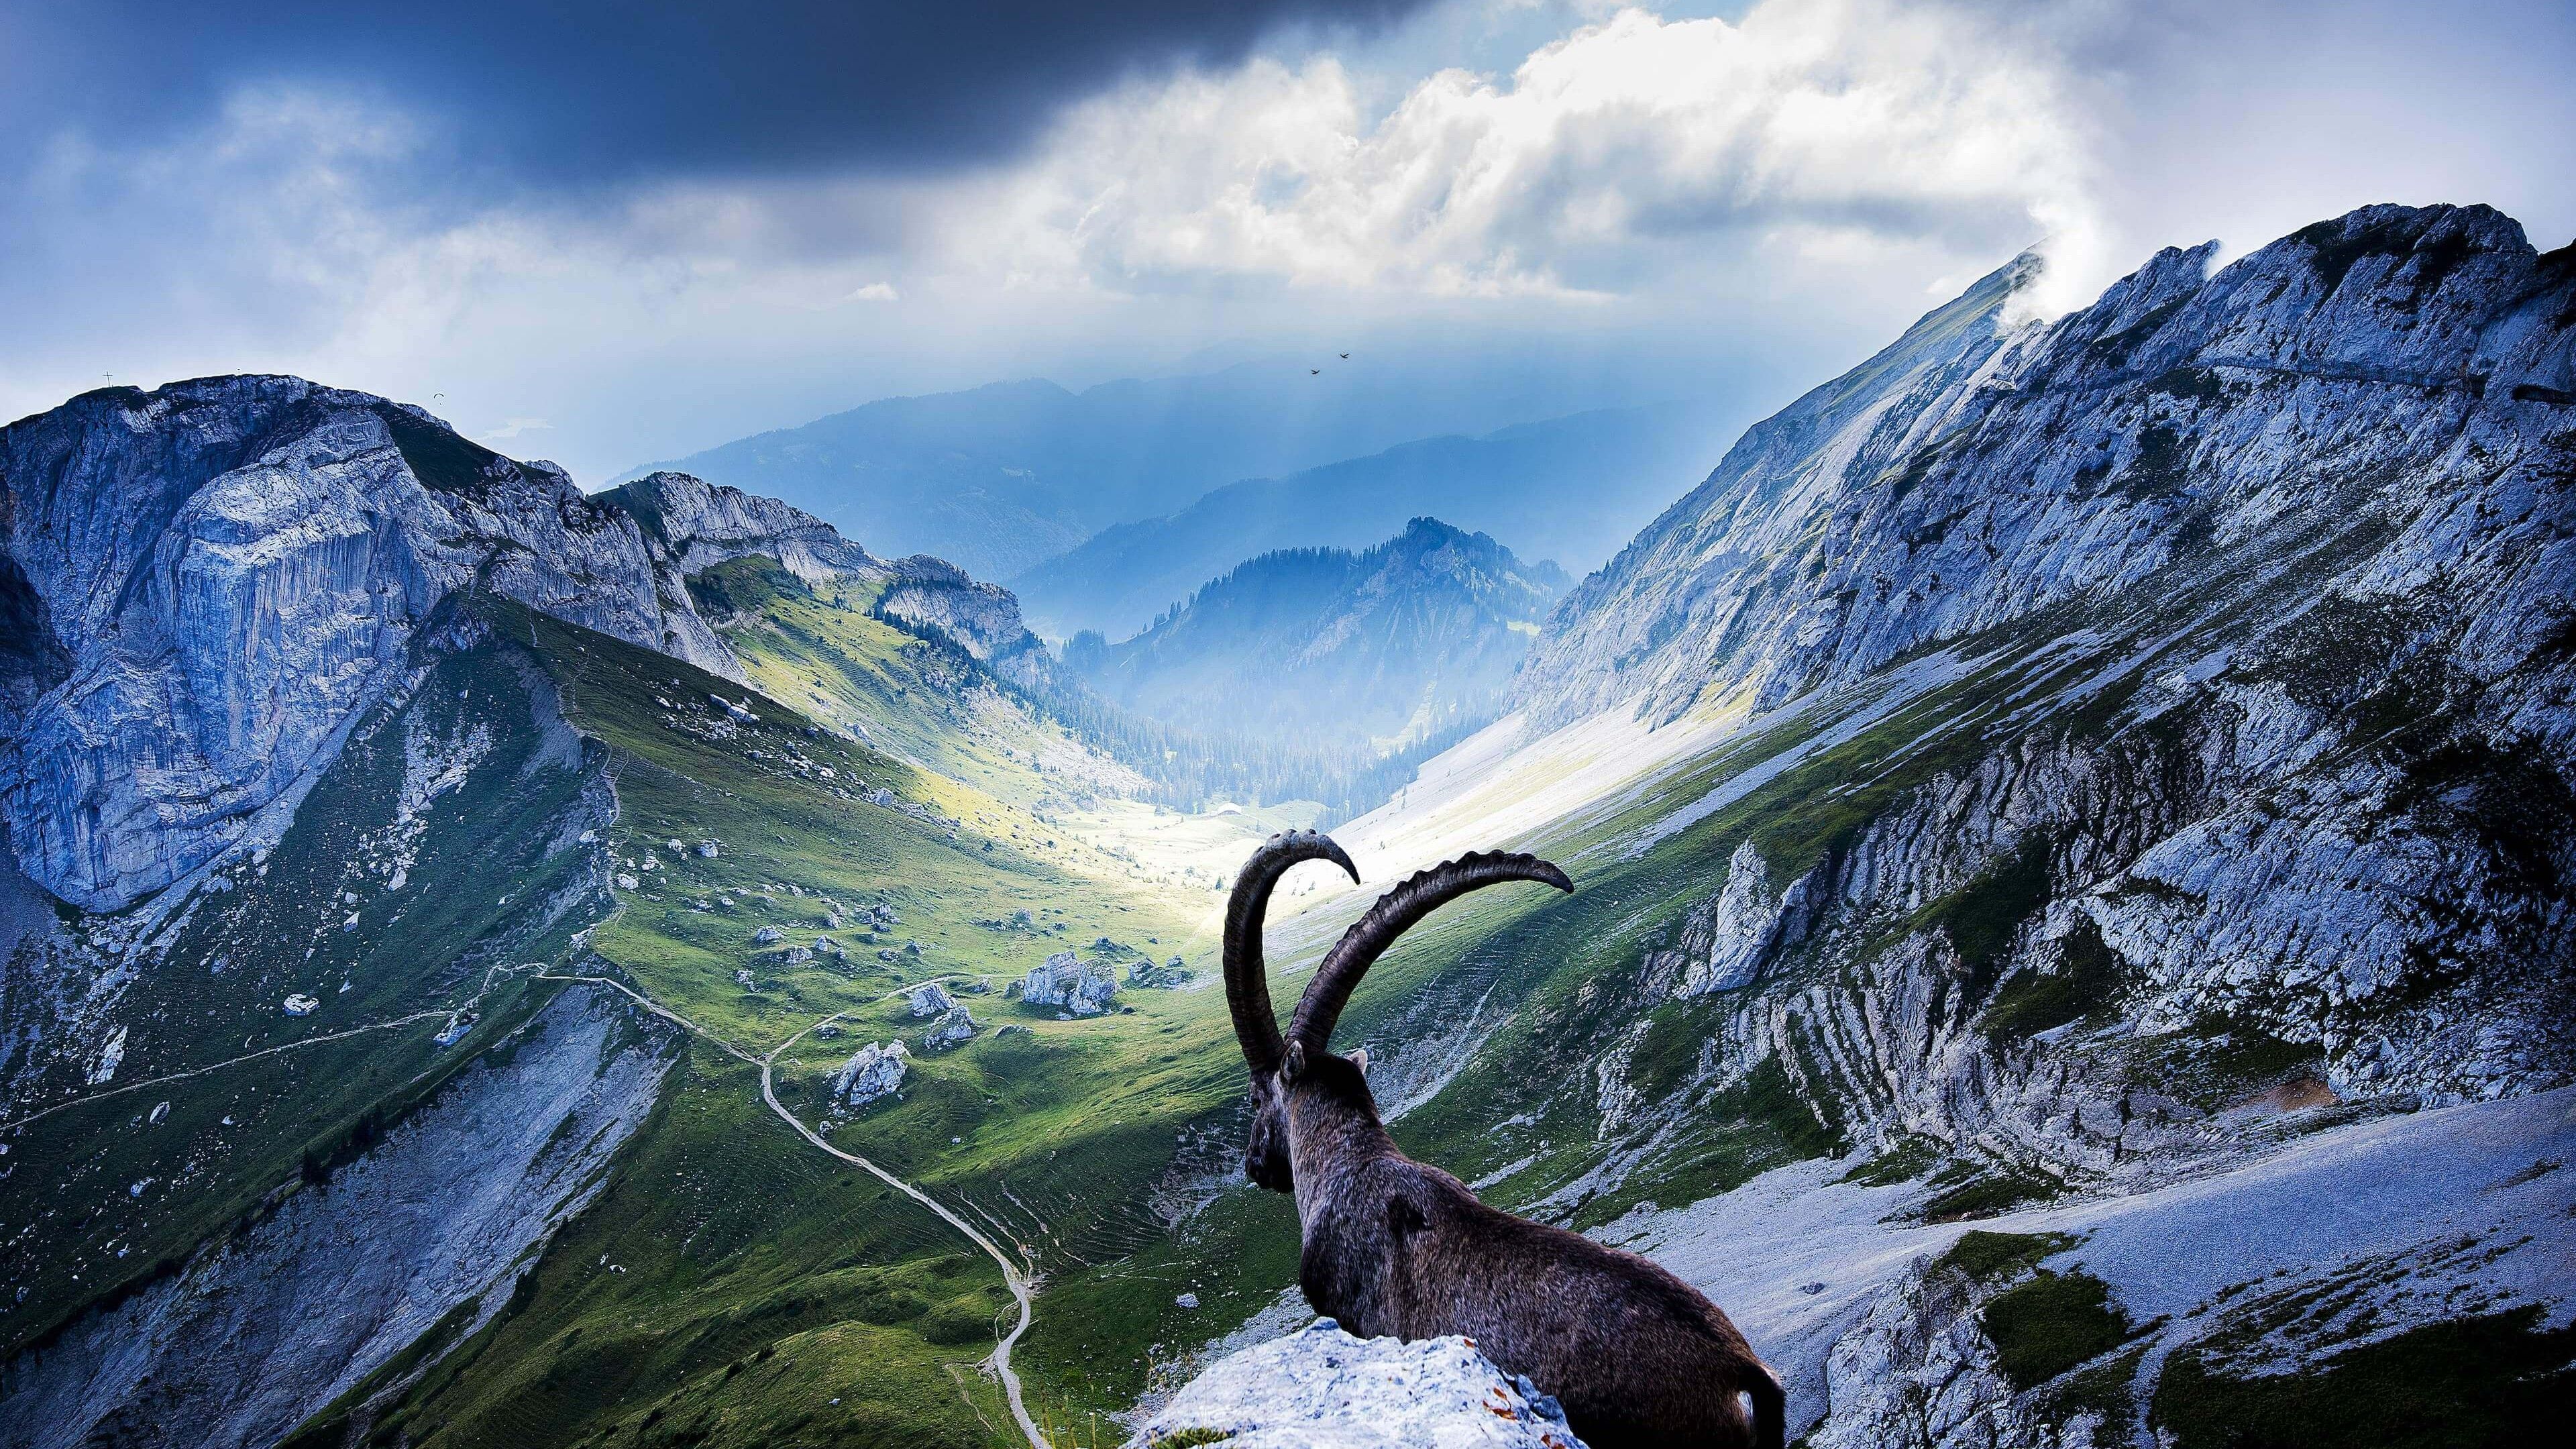 Goat 4K wallpaper for your desktop or mobile screen free and easy to download